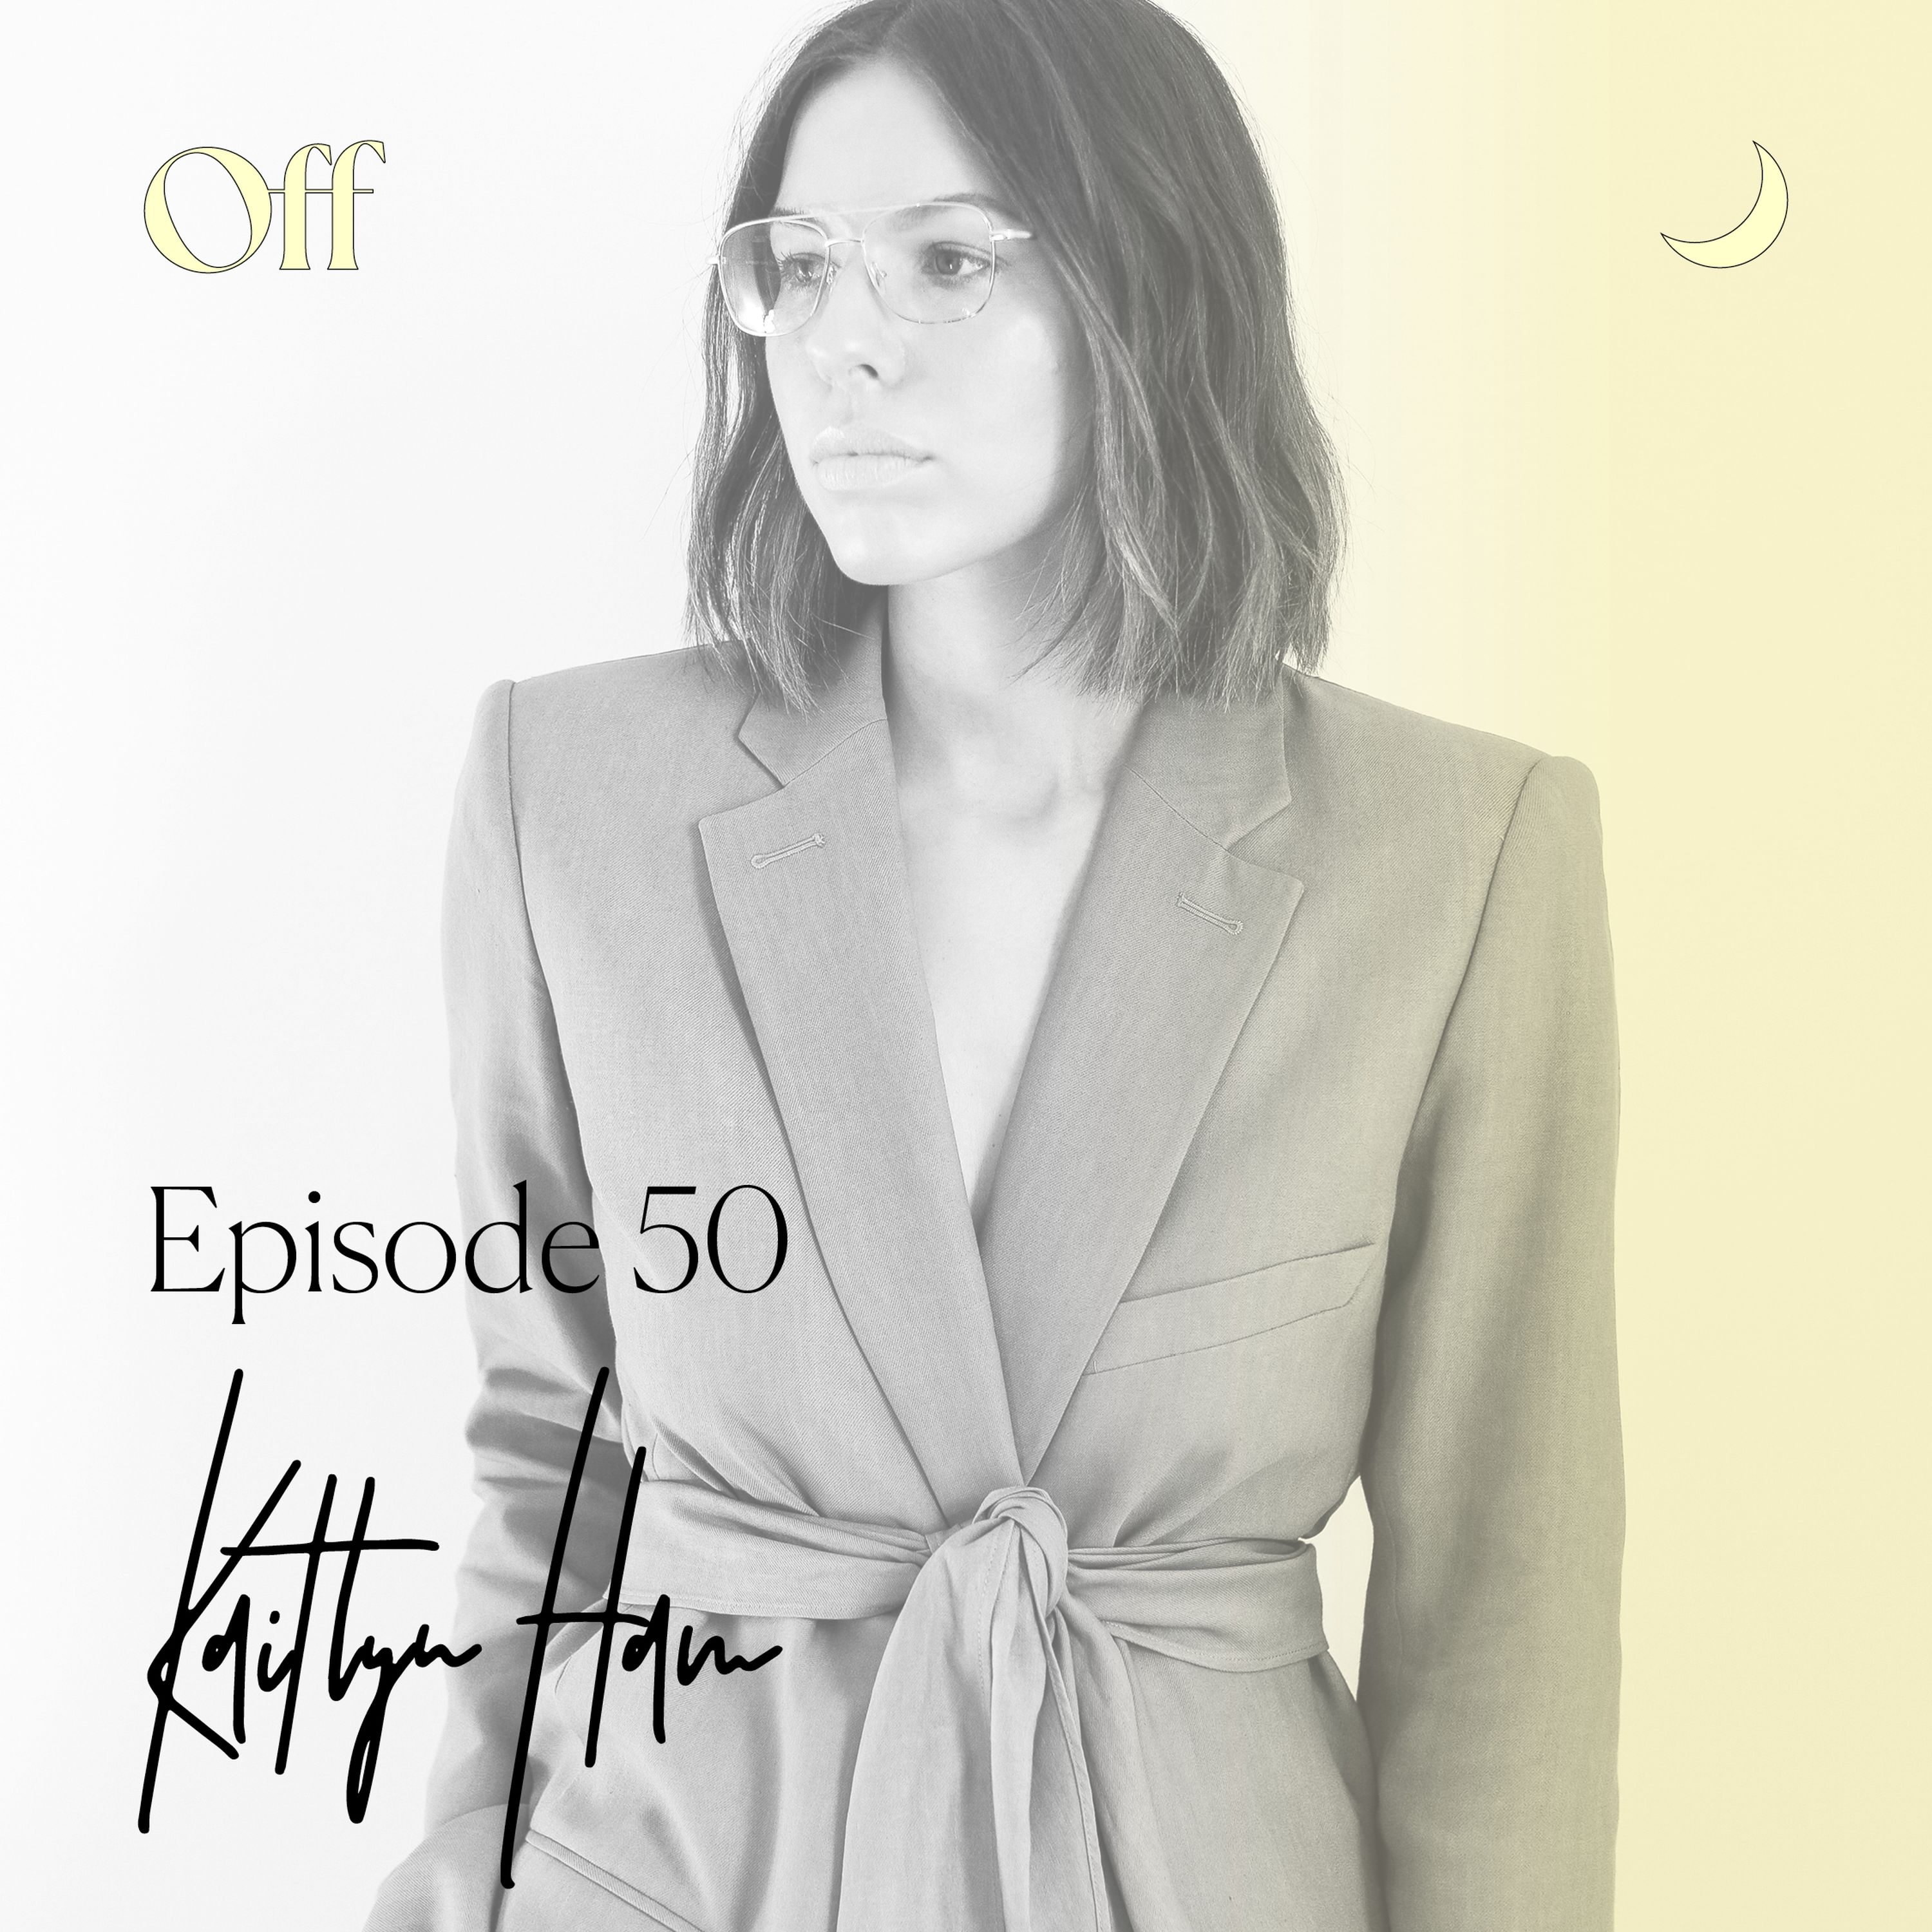 Kaity Ham on fashion blogging, personal style and how she’s thinking about the future.